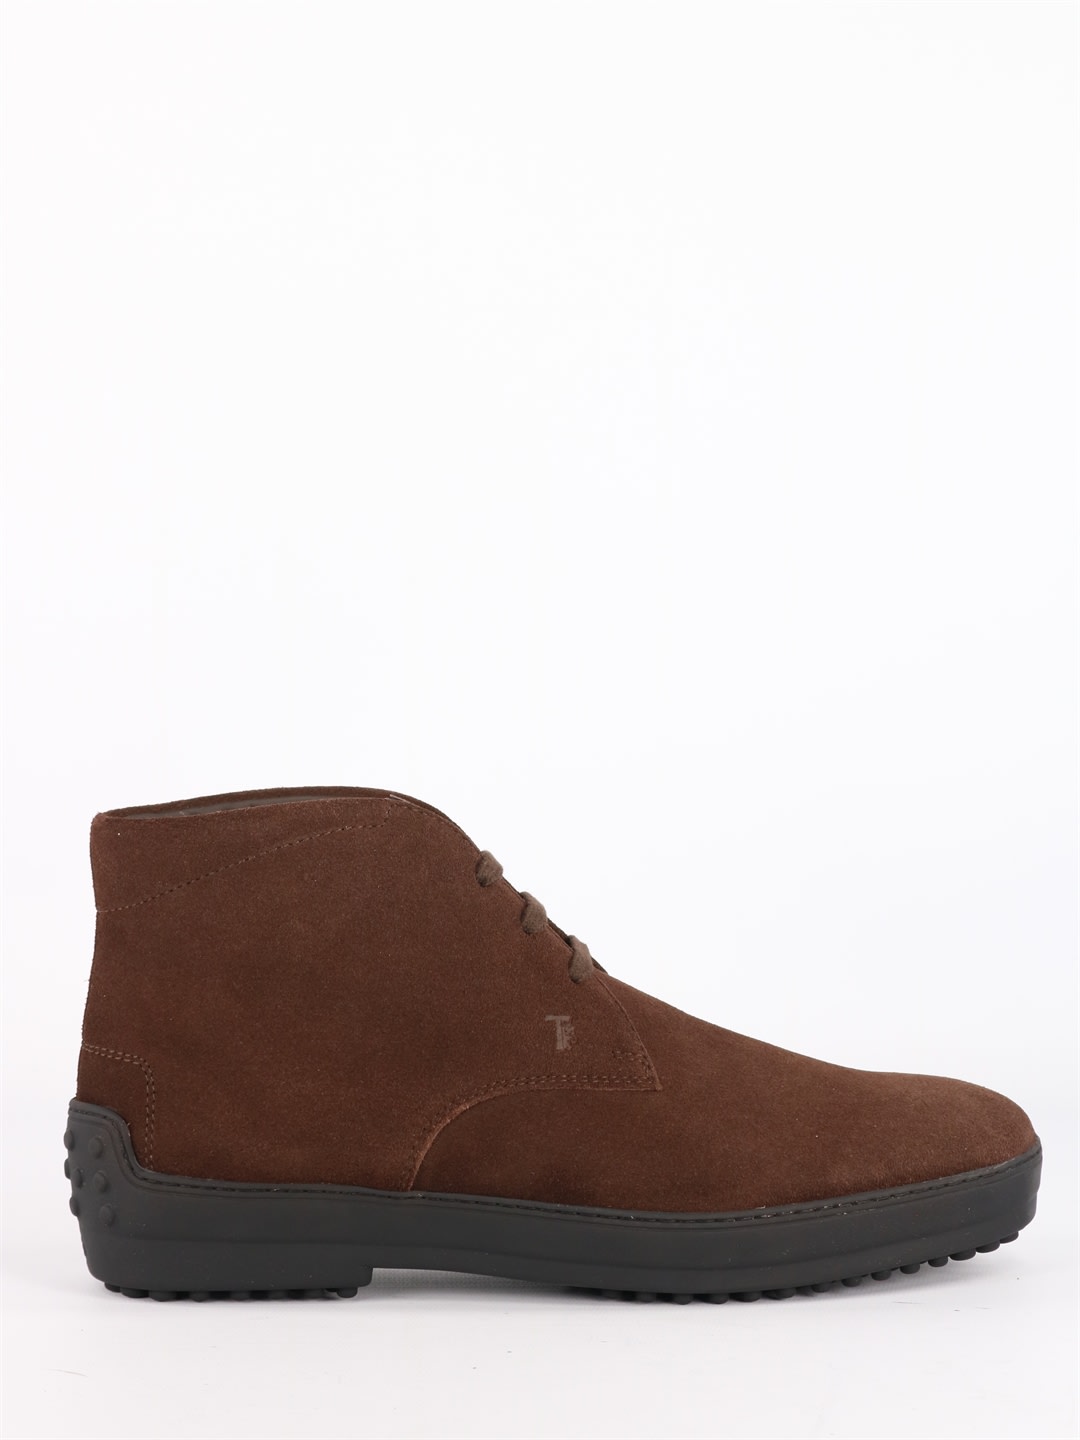 Tods Lace-up Shoe In Brown Suede